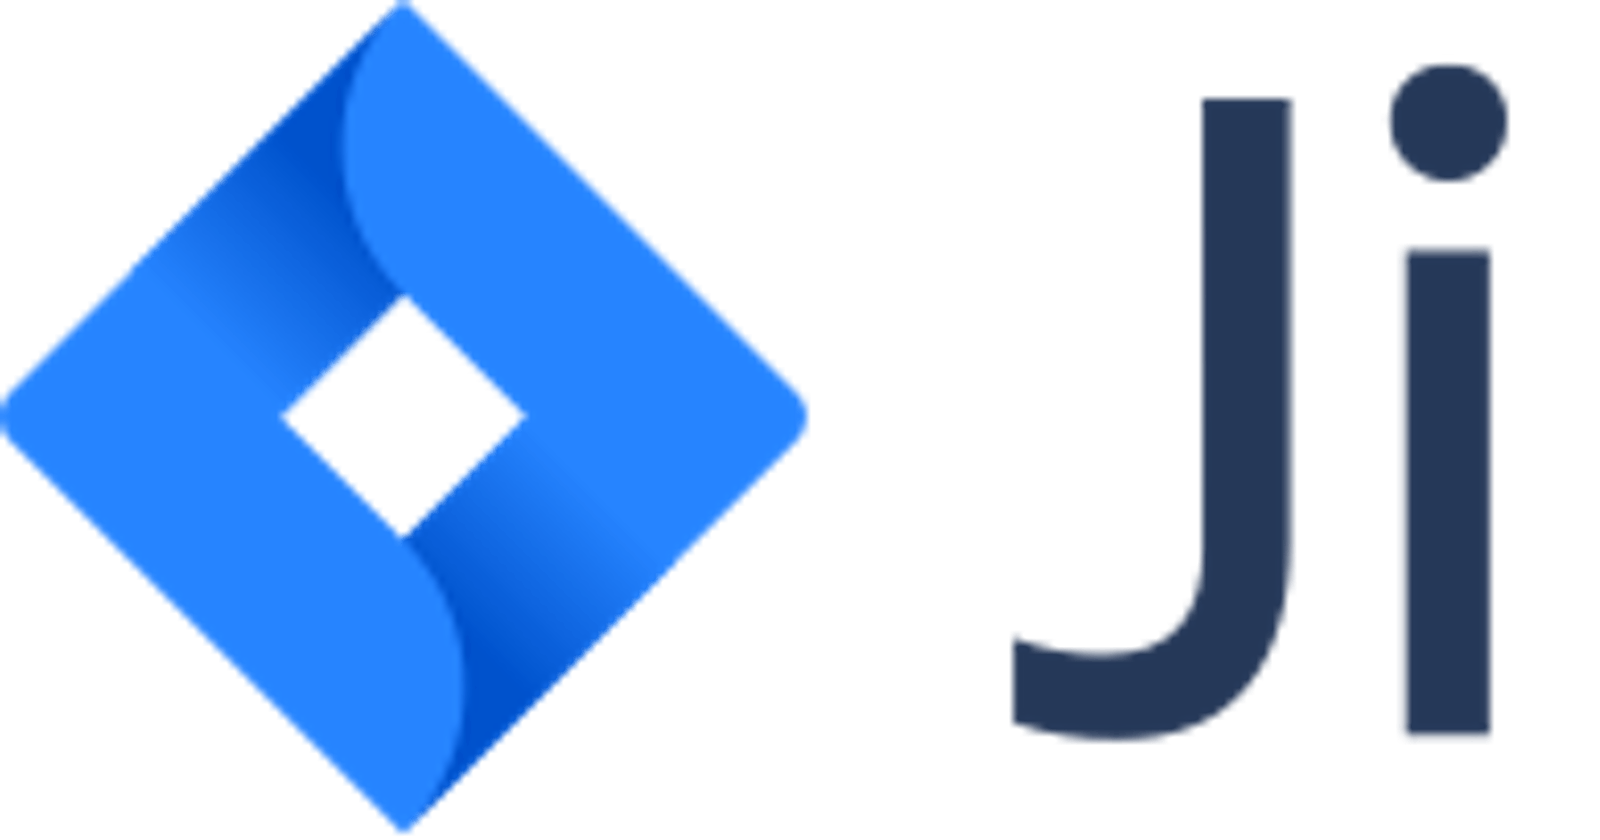 Jira - Extract key from commit